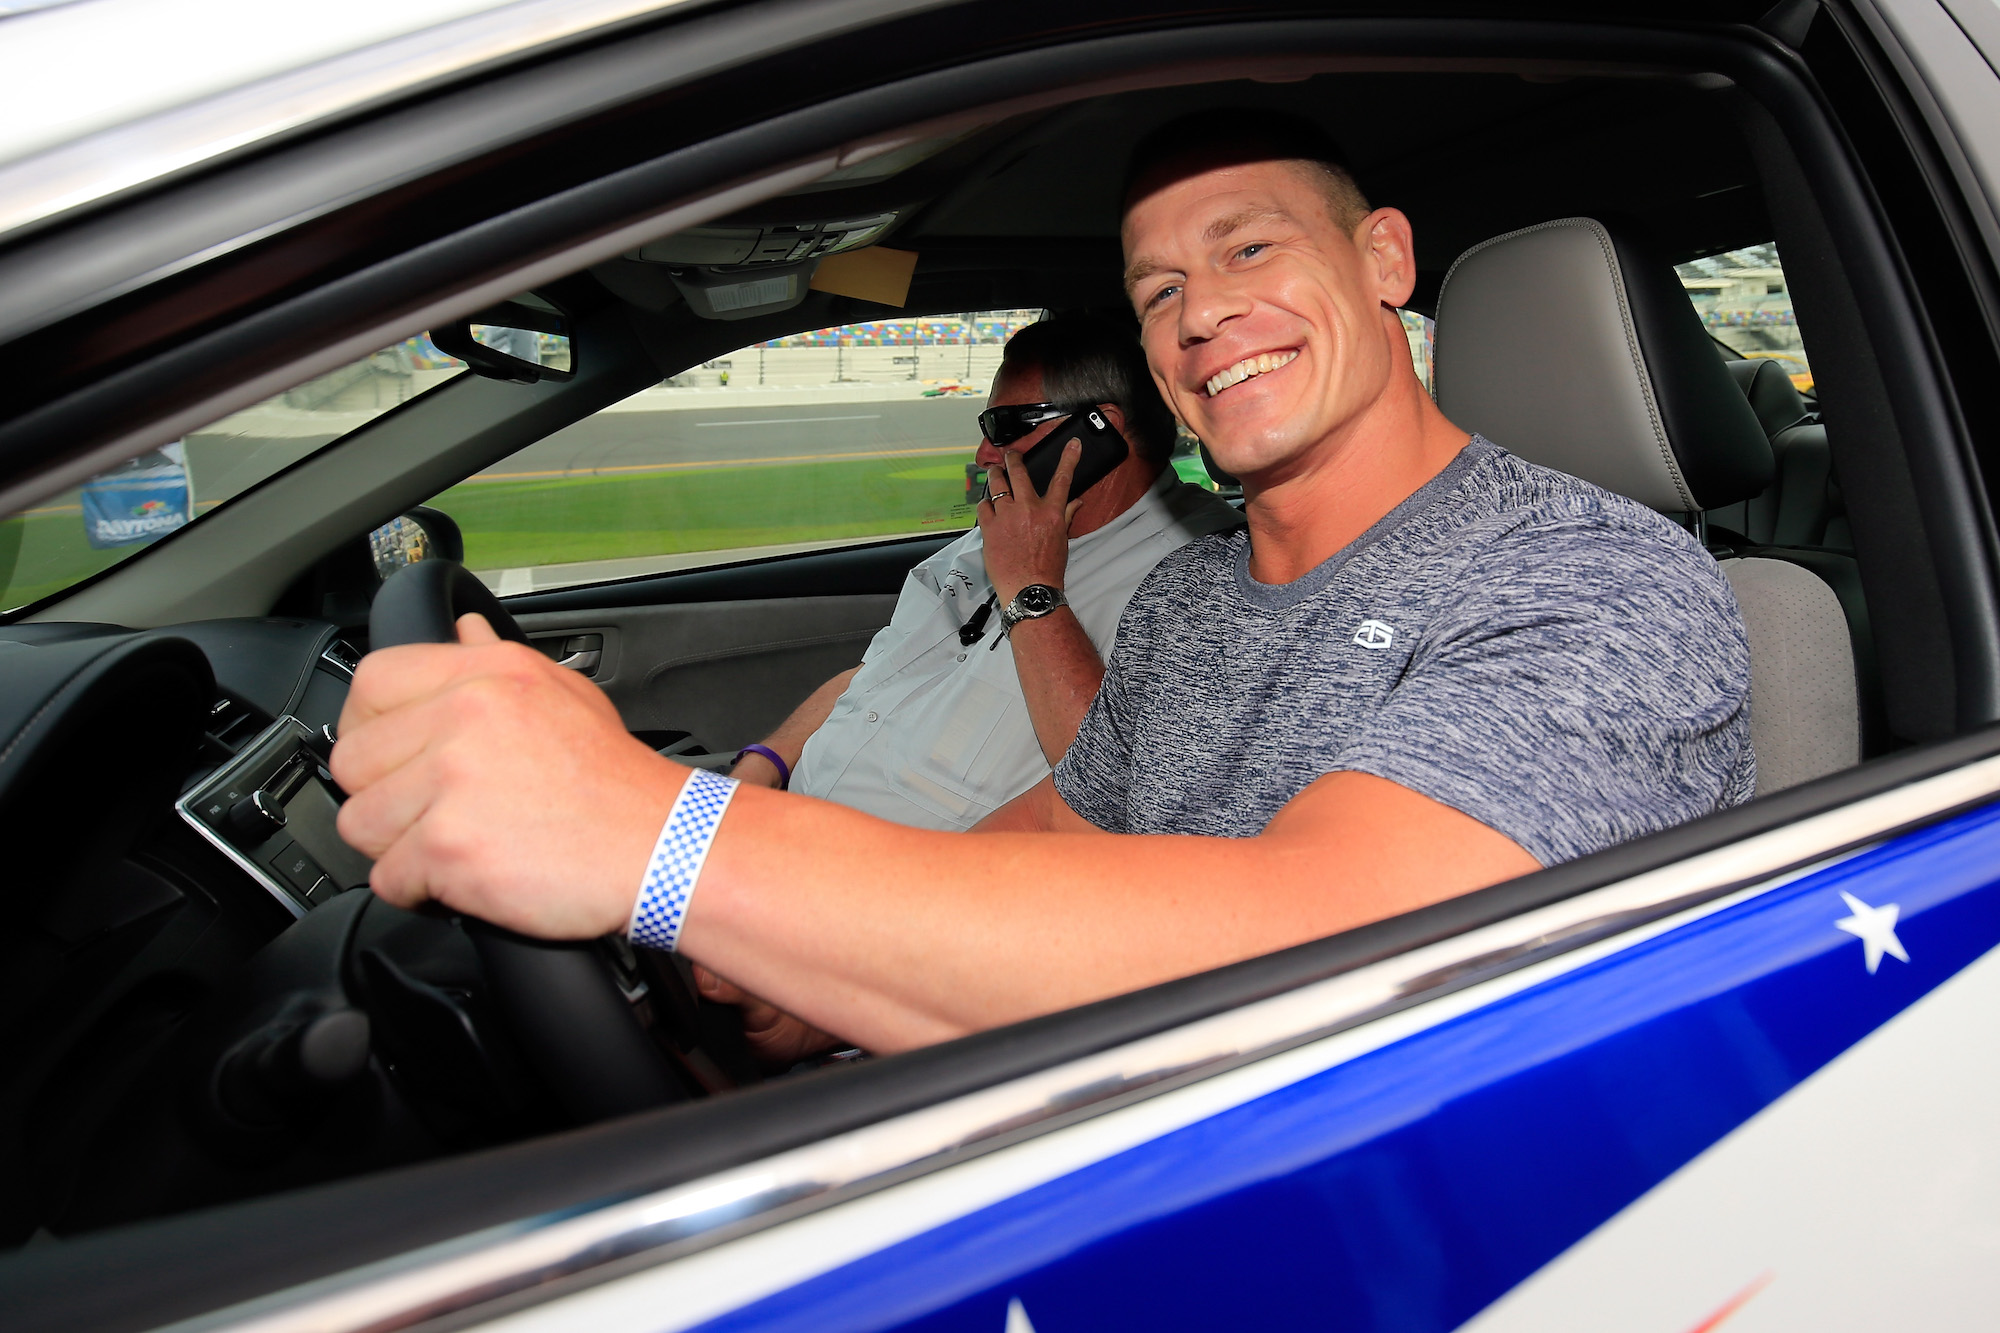 John Cena poses with the pace car before the Daytona 500 at Daytona International Speedway on in February 2016